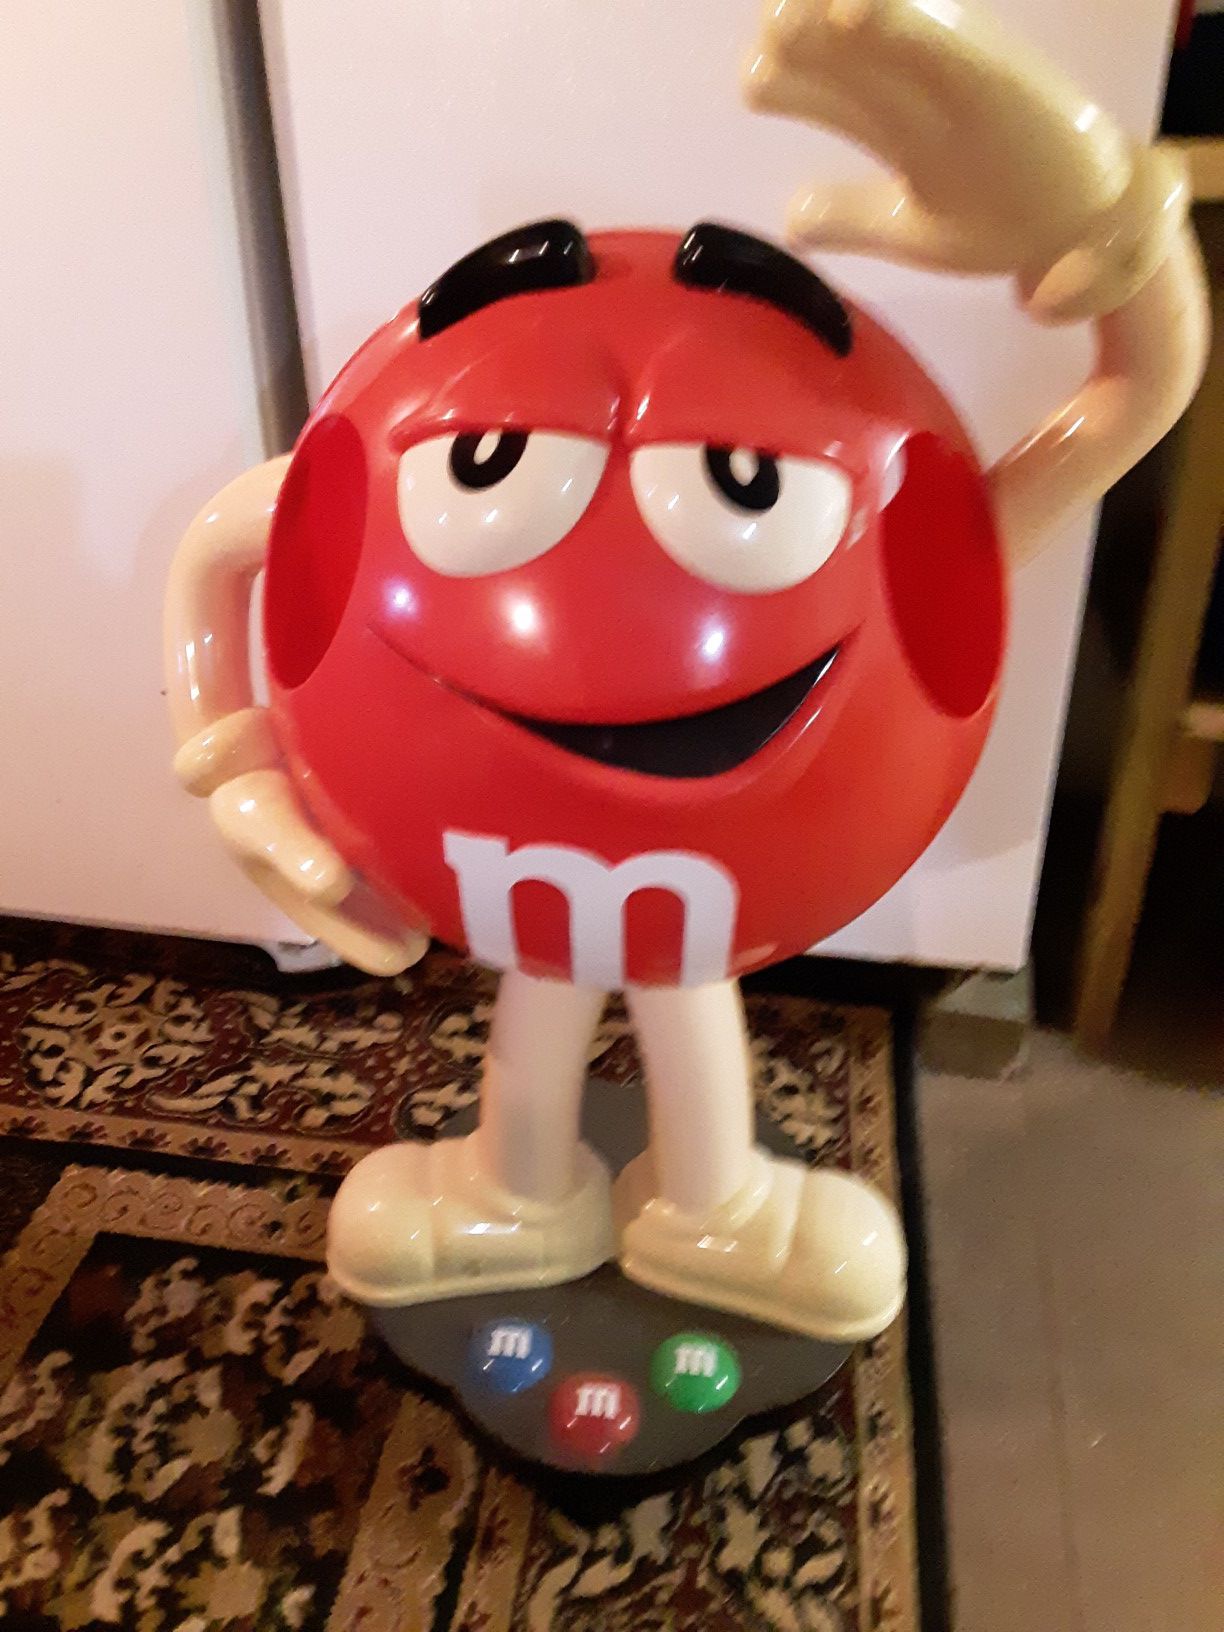 Red m&m character store display